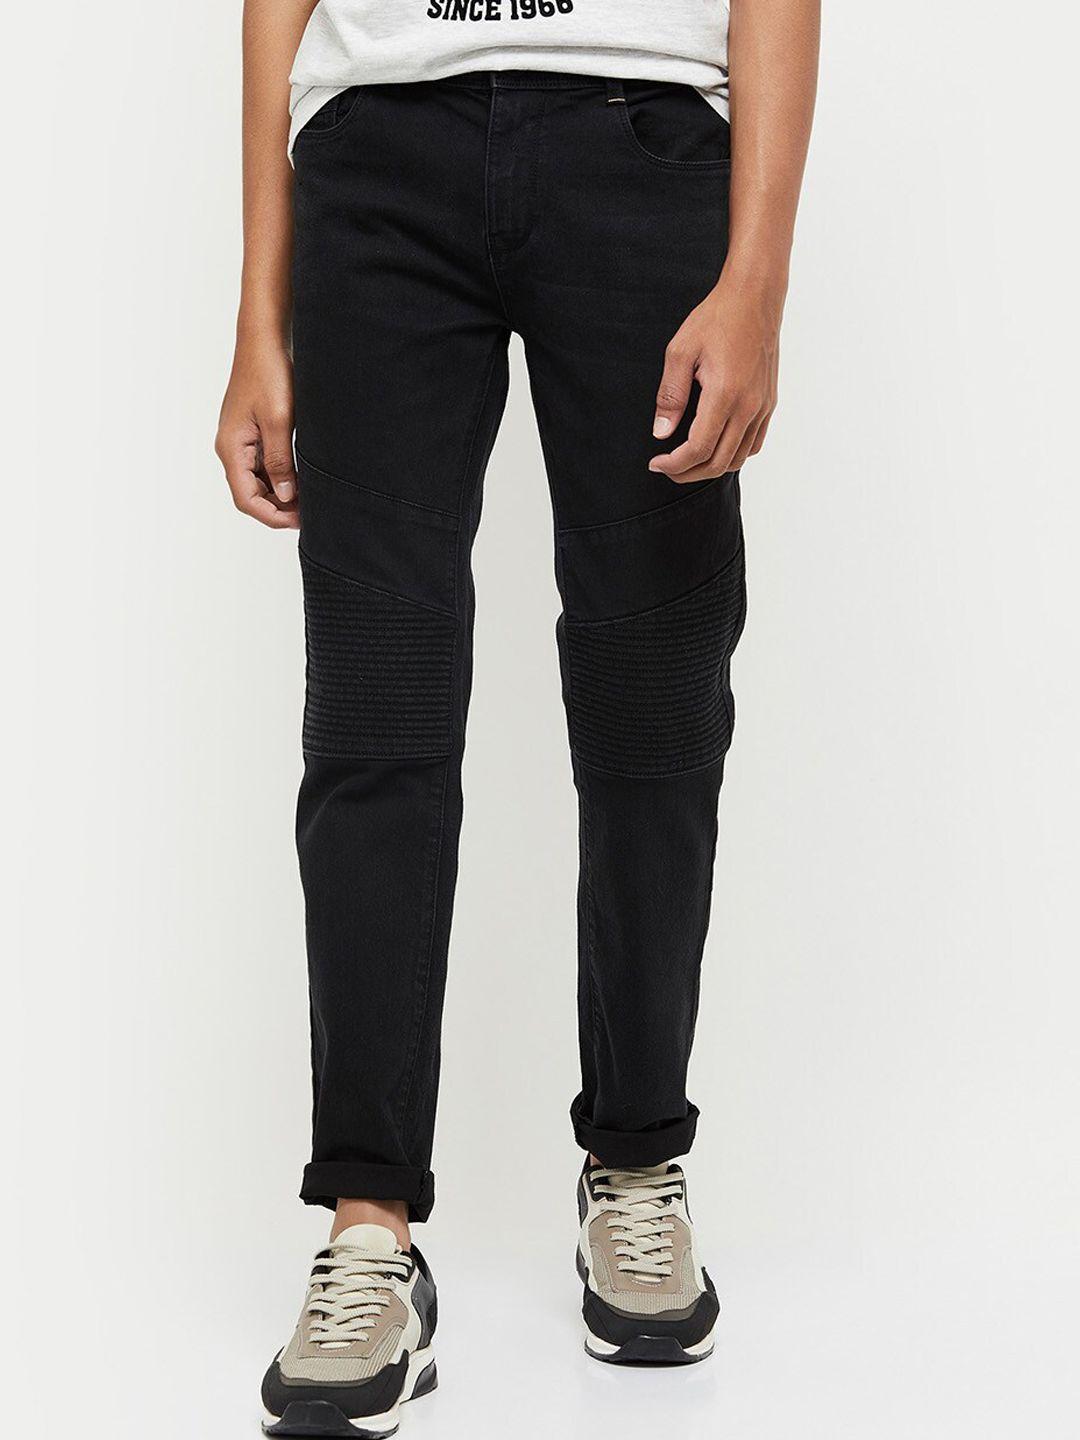 max Boys Charcoal Grey Solid Jeans